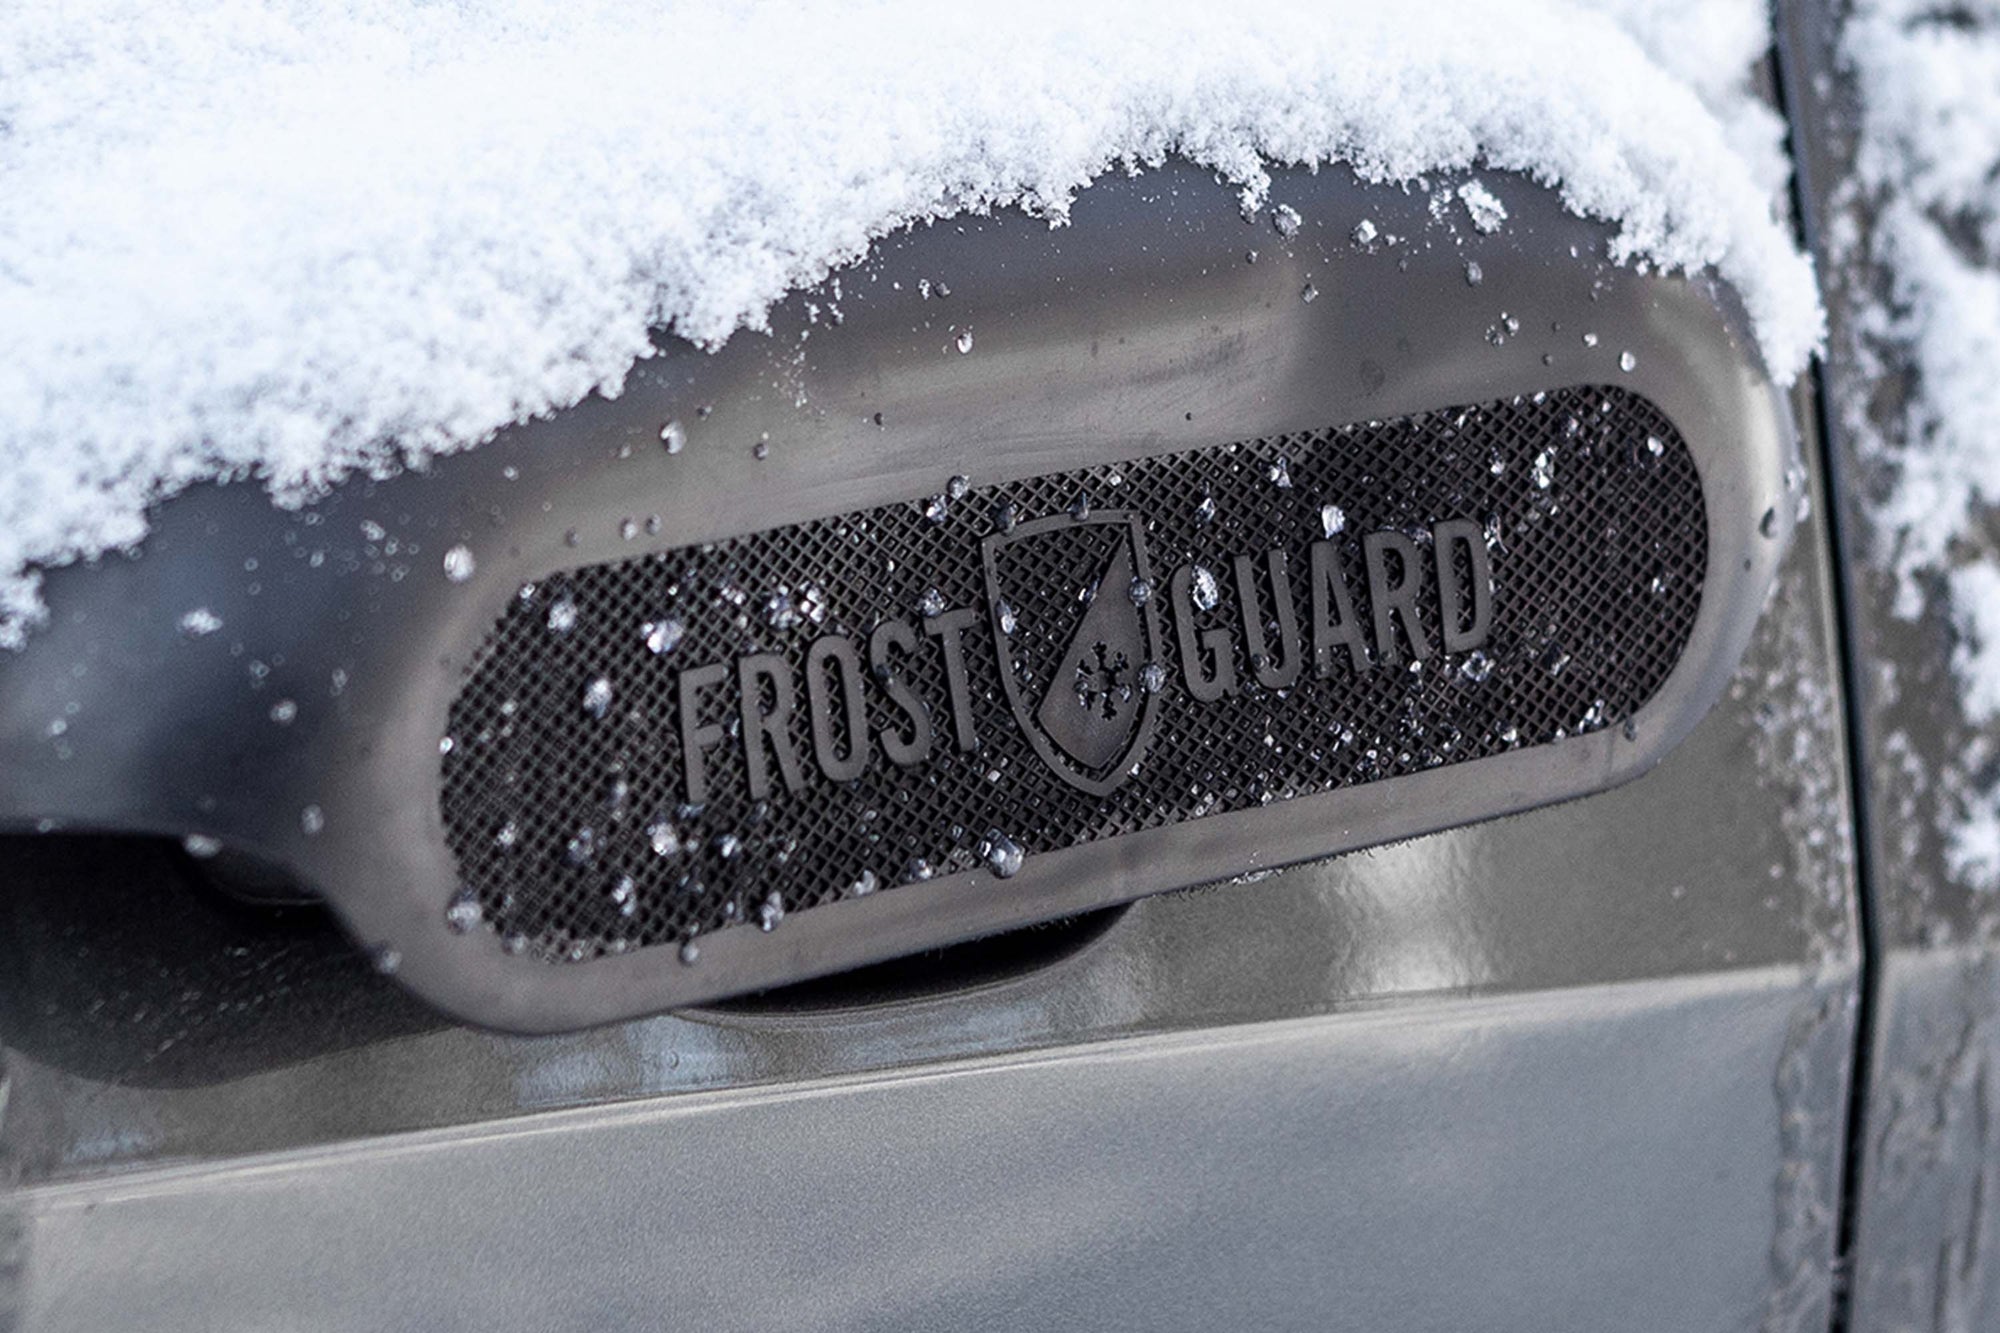 FrostGuard Winter Windshield Covers and Accessories - Urban Transit™